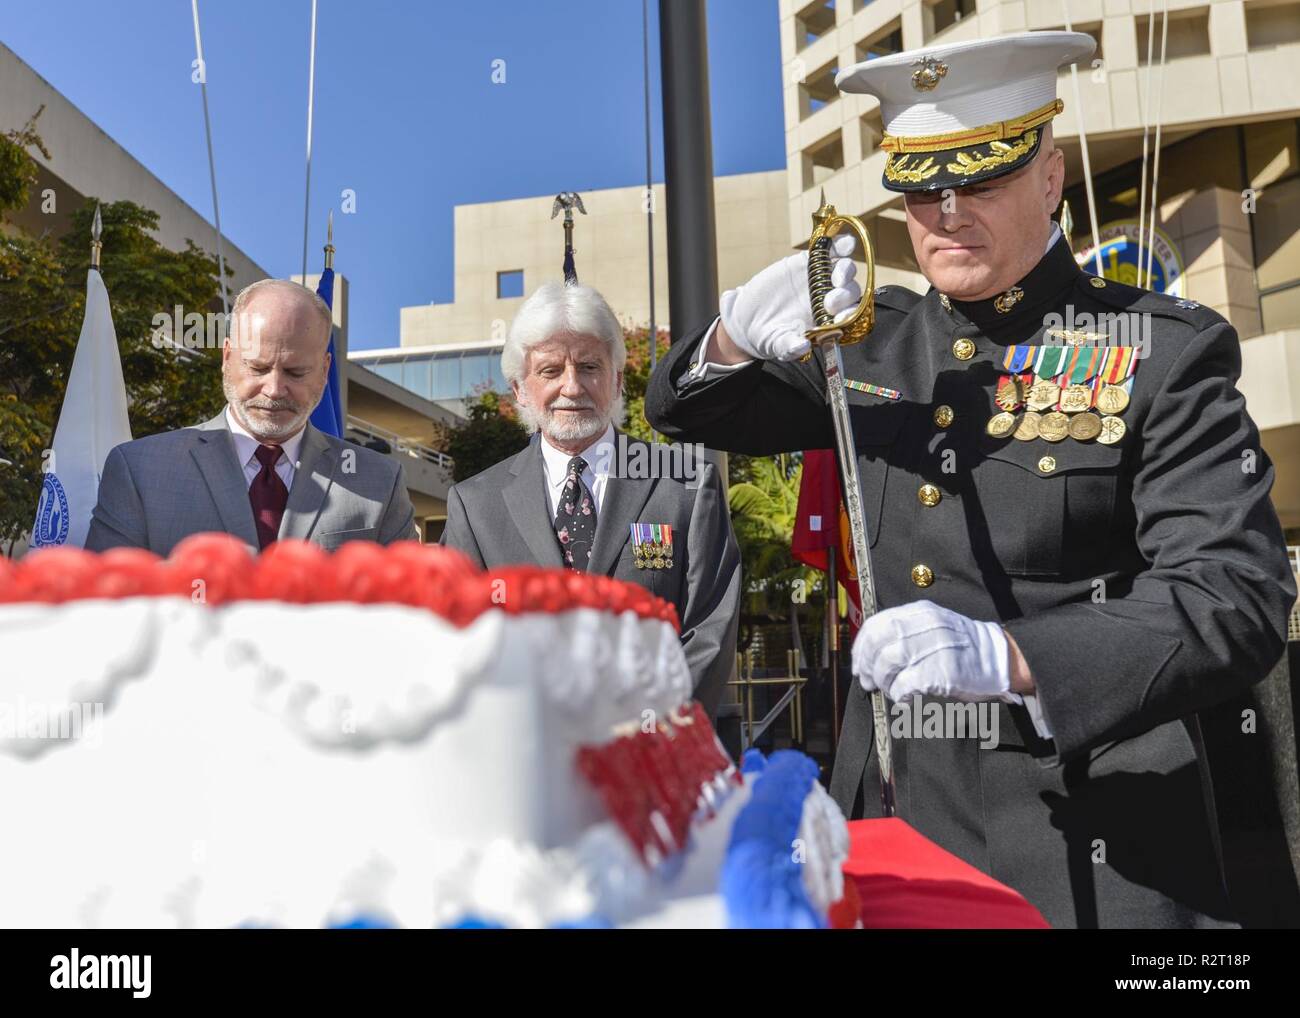 SAN DIEIGO (Nov. 09,2018) — Lieutenant Colonel James Hoffmann, commanding officer of the Wounded Warrior Battalion at Naval Medical Center San Diego (NMCSD) cleans the sword after cutting the first piece of cake at a celebration of the 243rd Marine Corps Birthday.  NMCSD is the largest naval hospital on the west coast, employing more than 6,000 Sailors, Marines, civilians and contractors. Stock Photo